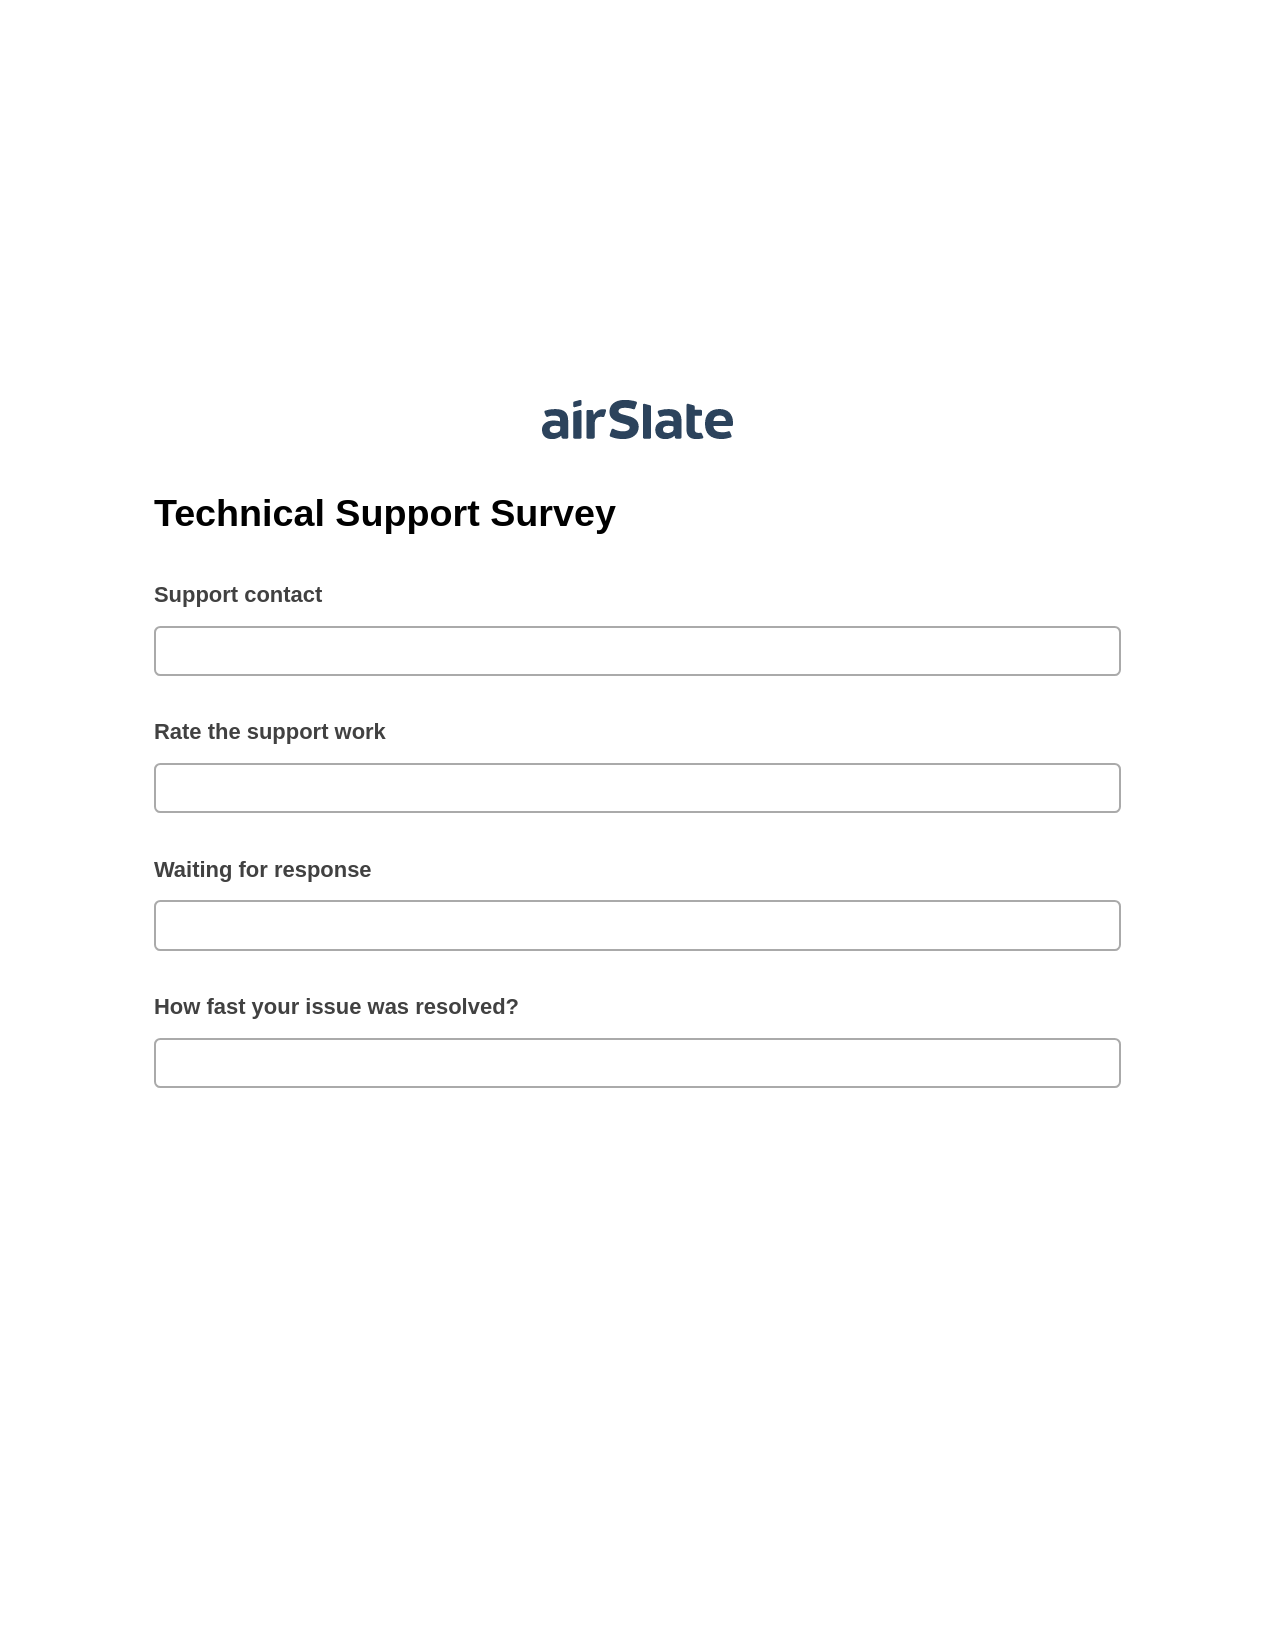 Multirole Technical Support Survey Pre-fill from Salesforce Records with SOQL Bot, Revoke Access Bot, Webhook Postfinish Bot